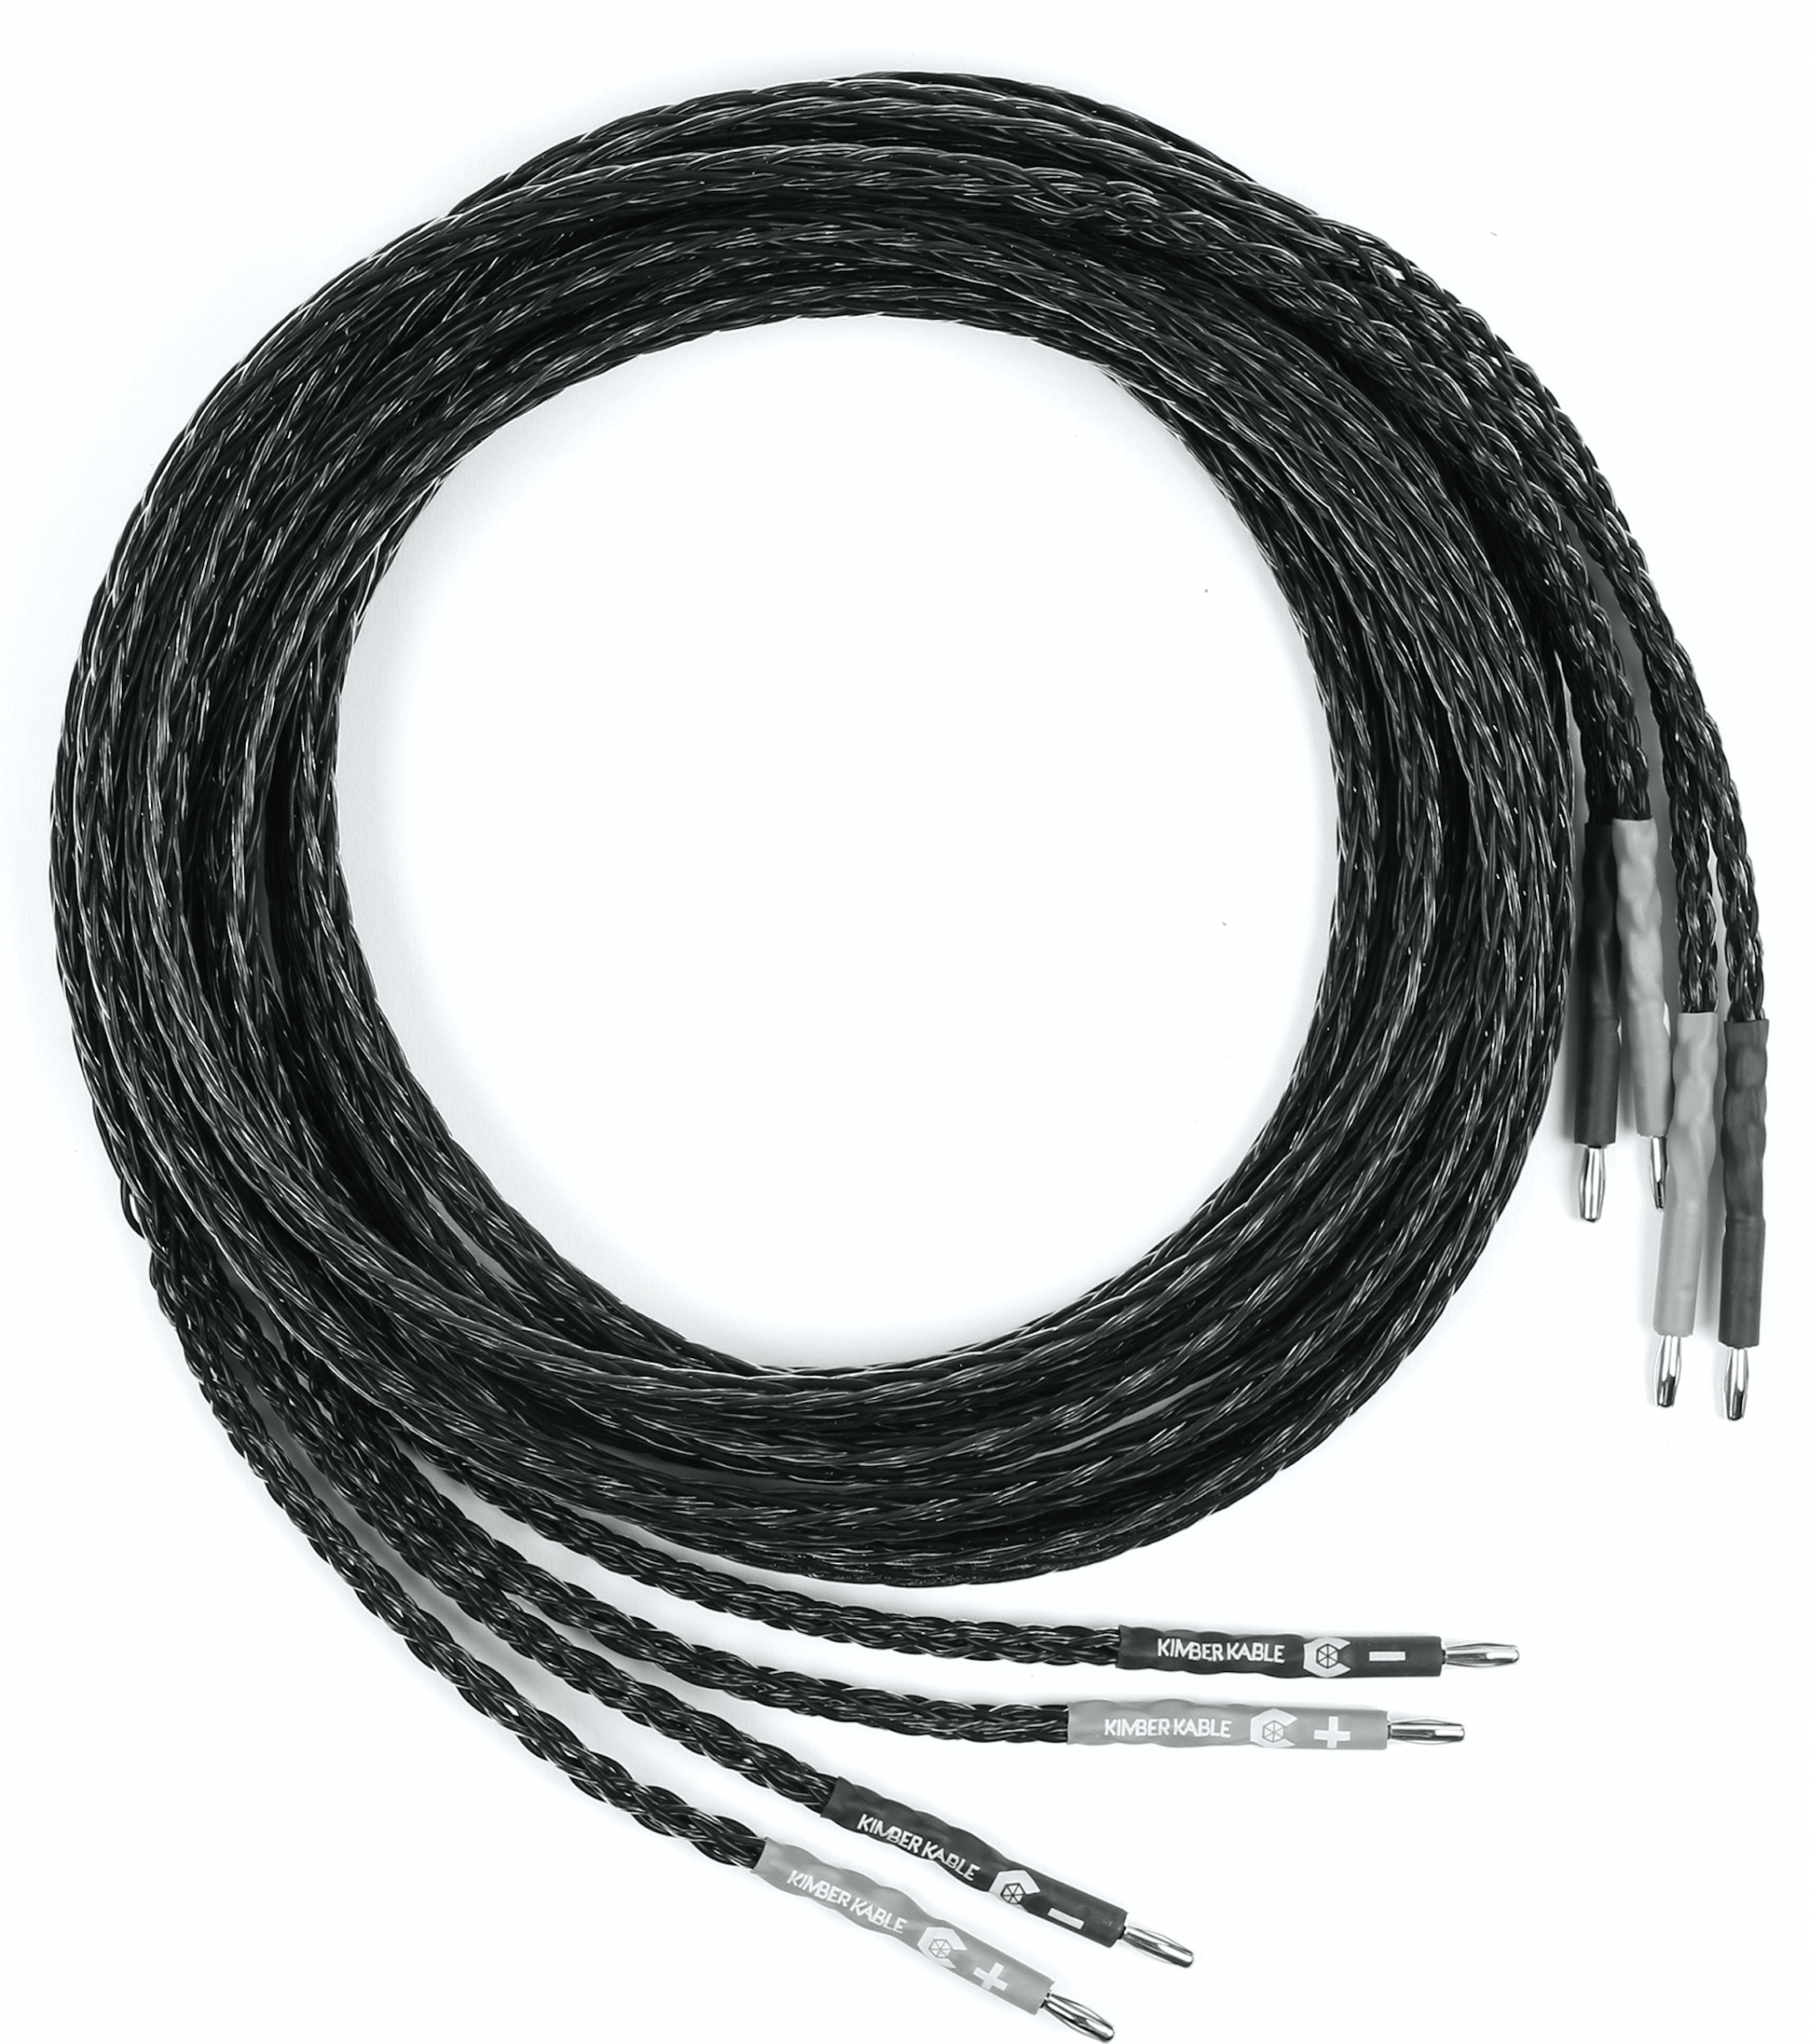 Carbon Speaker Cables From Kimber